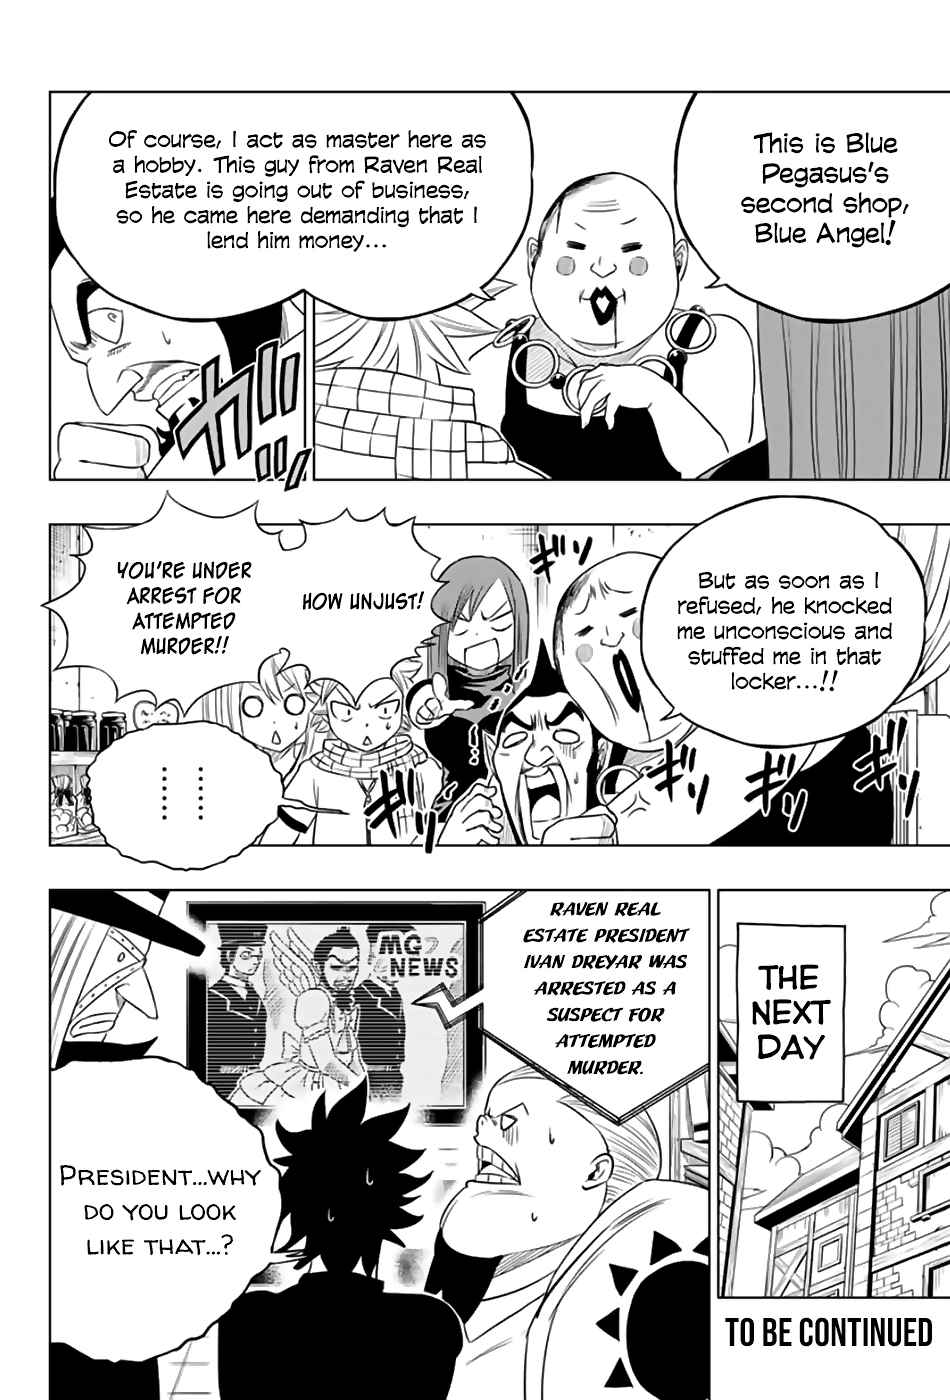 Fairy Tail: City Hero Ch. 41 Sweet Disguise 2